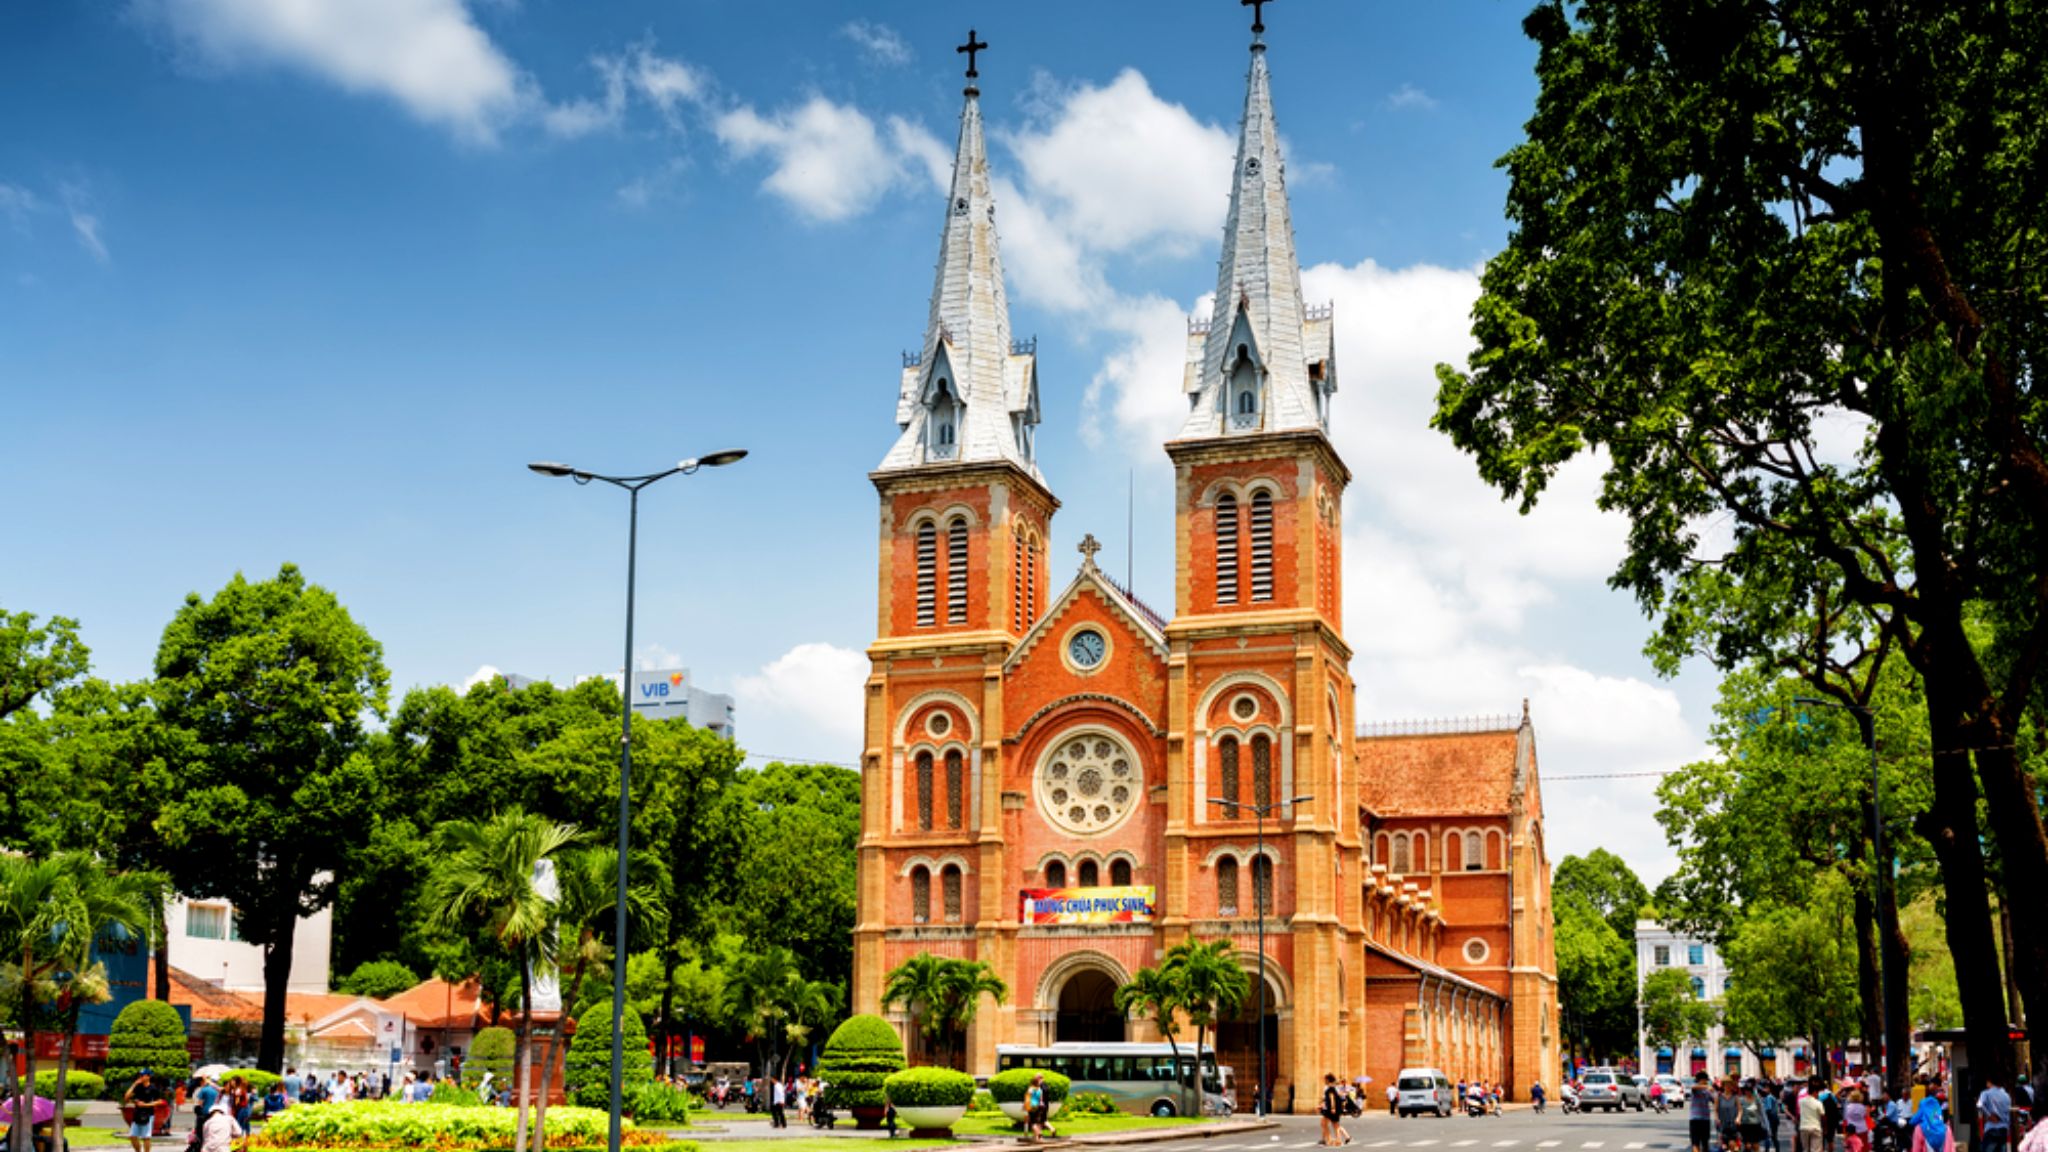 Saigon Notre Dame Cathedral, The Best Example Of Classical French Colonial Architecture